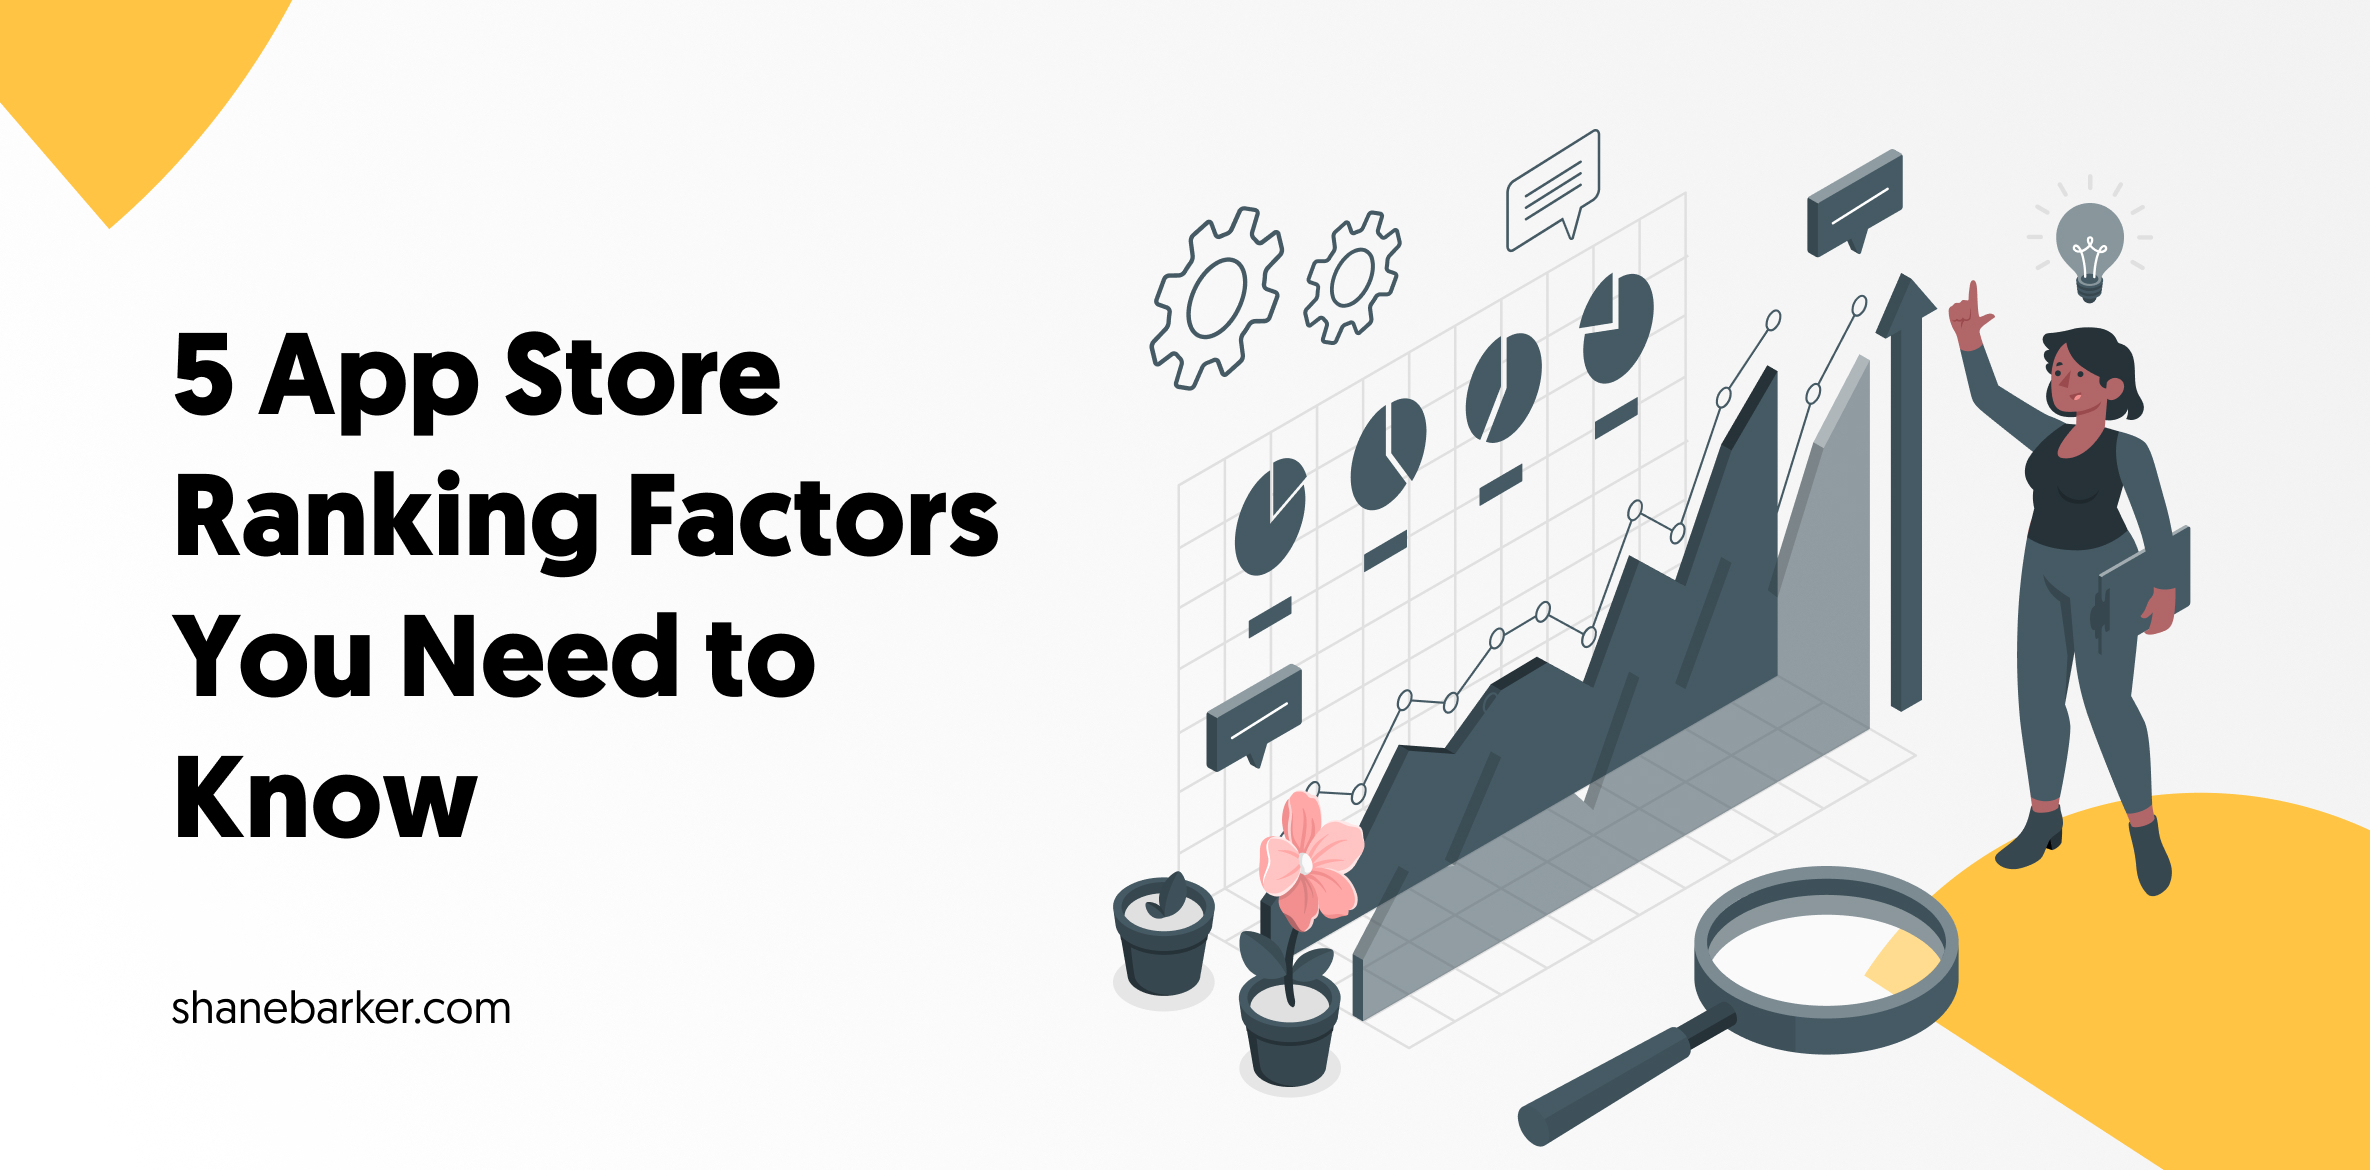 App Store Ranking Factors You Need to Know